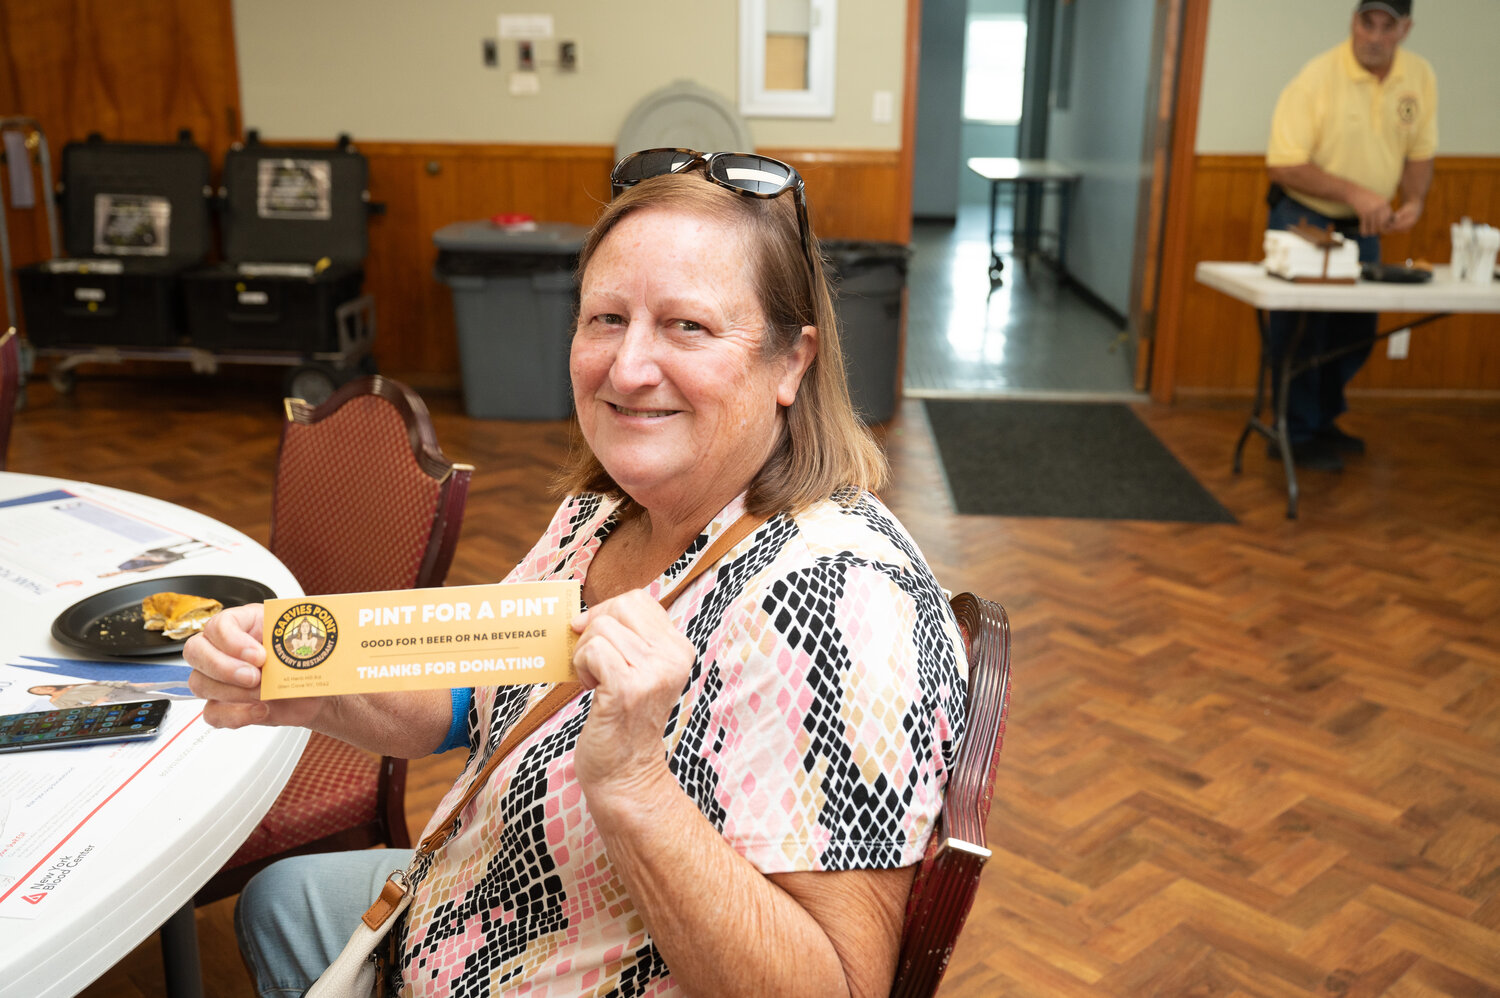 The Fire Department and Garvies Point Brewery partnered to make blood donations a more festive experience. Maureen Kenny received a certificate to the brewery for taking the time to donate blood.